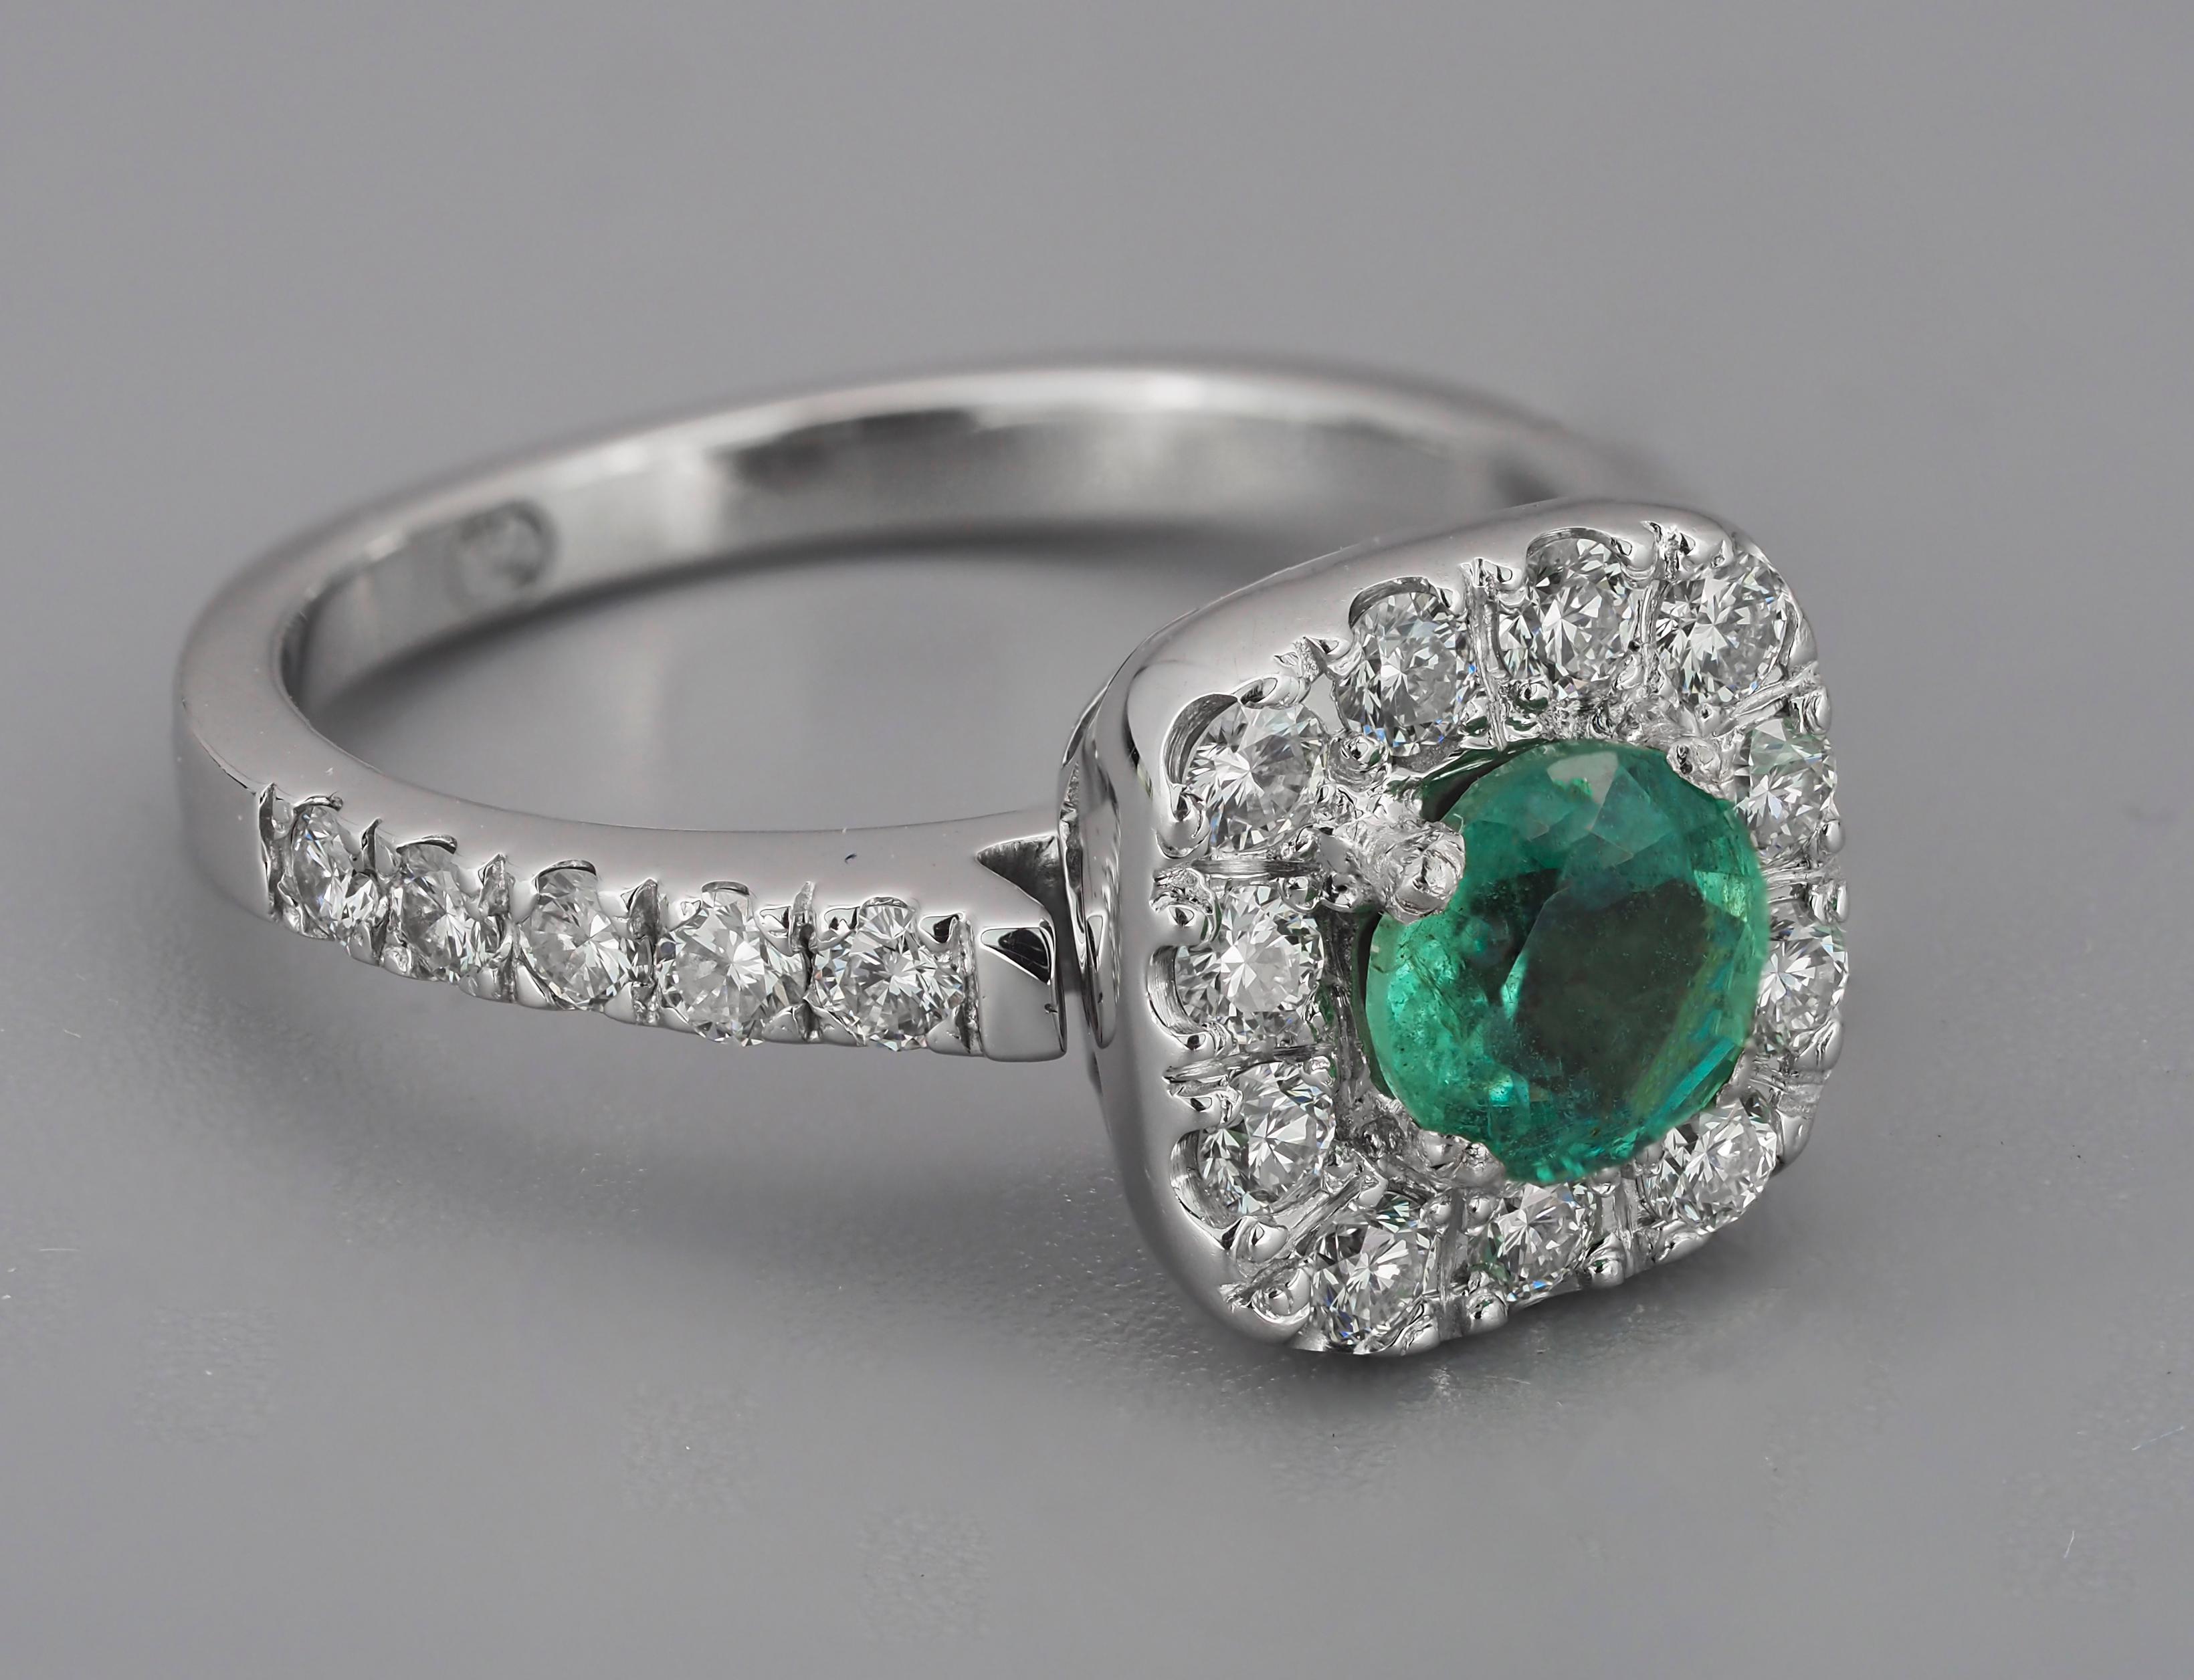 For Sale:  Emerald and Diamonds 14k Gold Ring, Vintage Style Emerald and Diamonds Ring 3